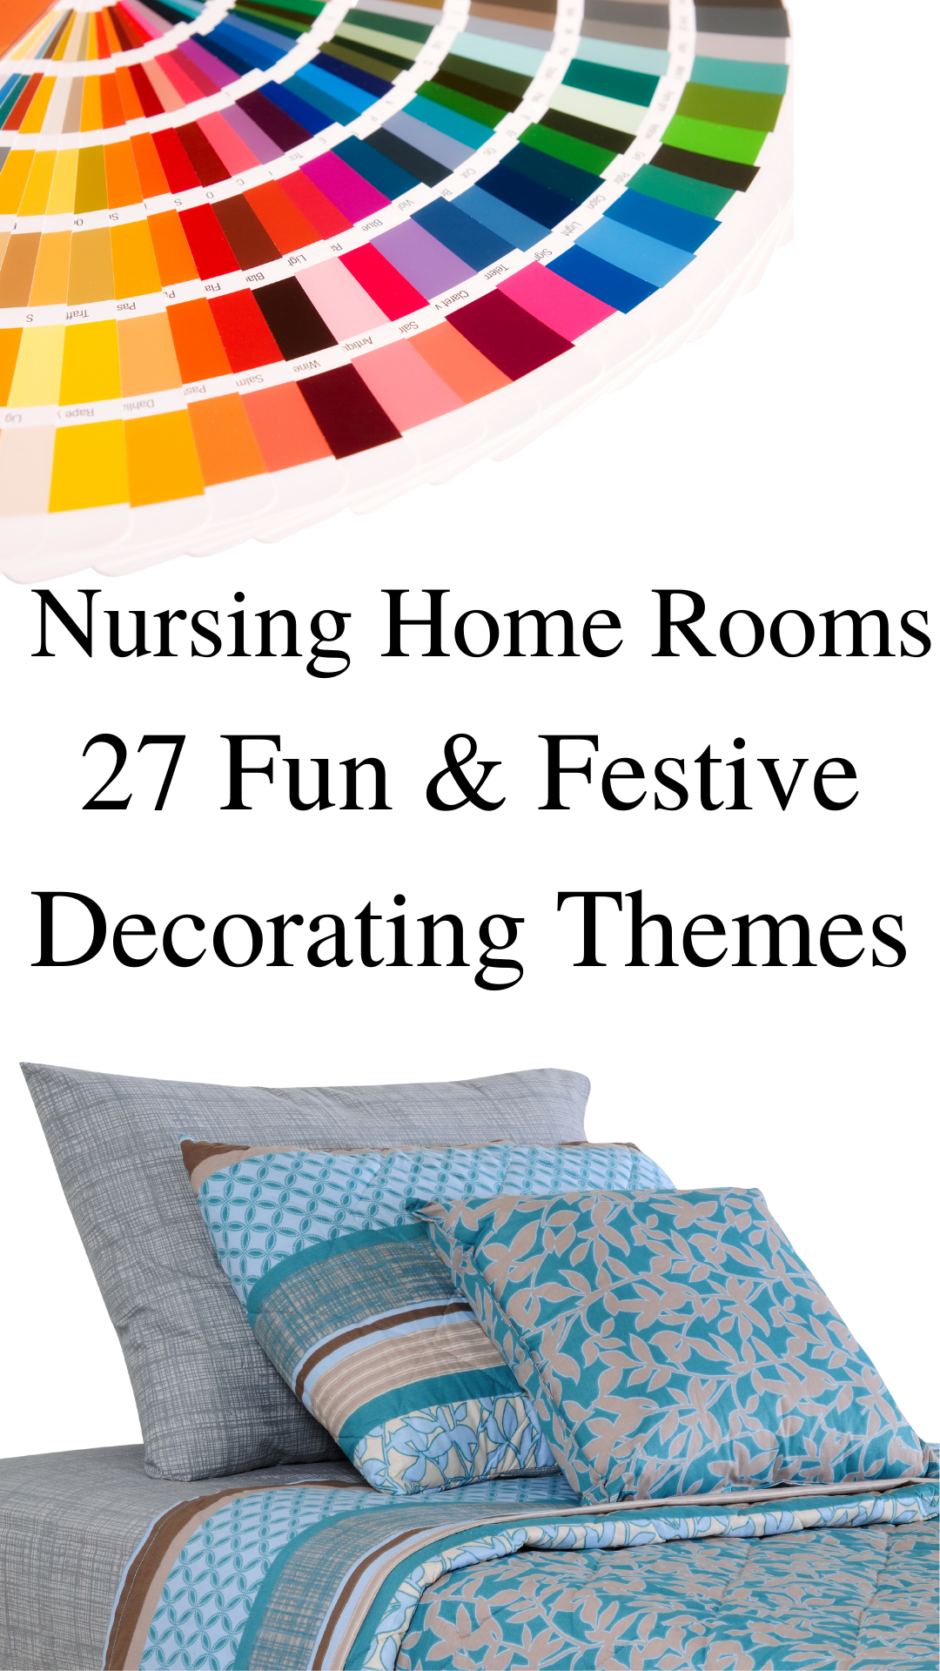 Decorating Themes for Nursing Home Rooms